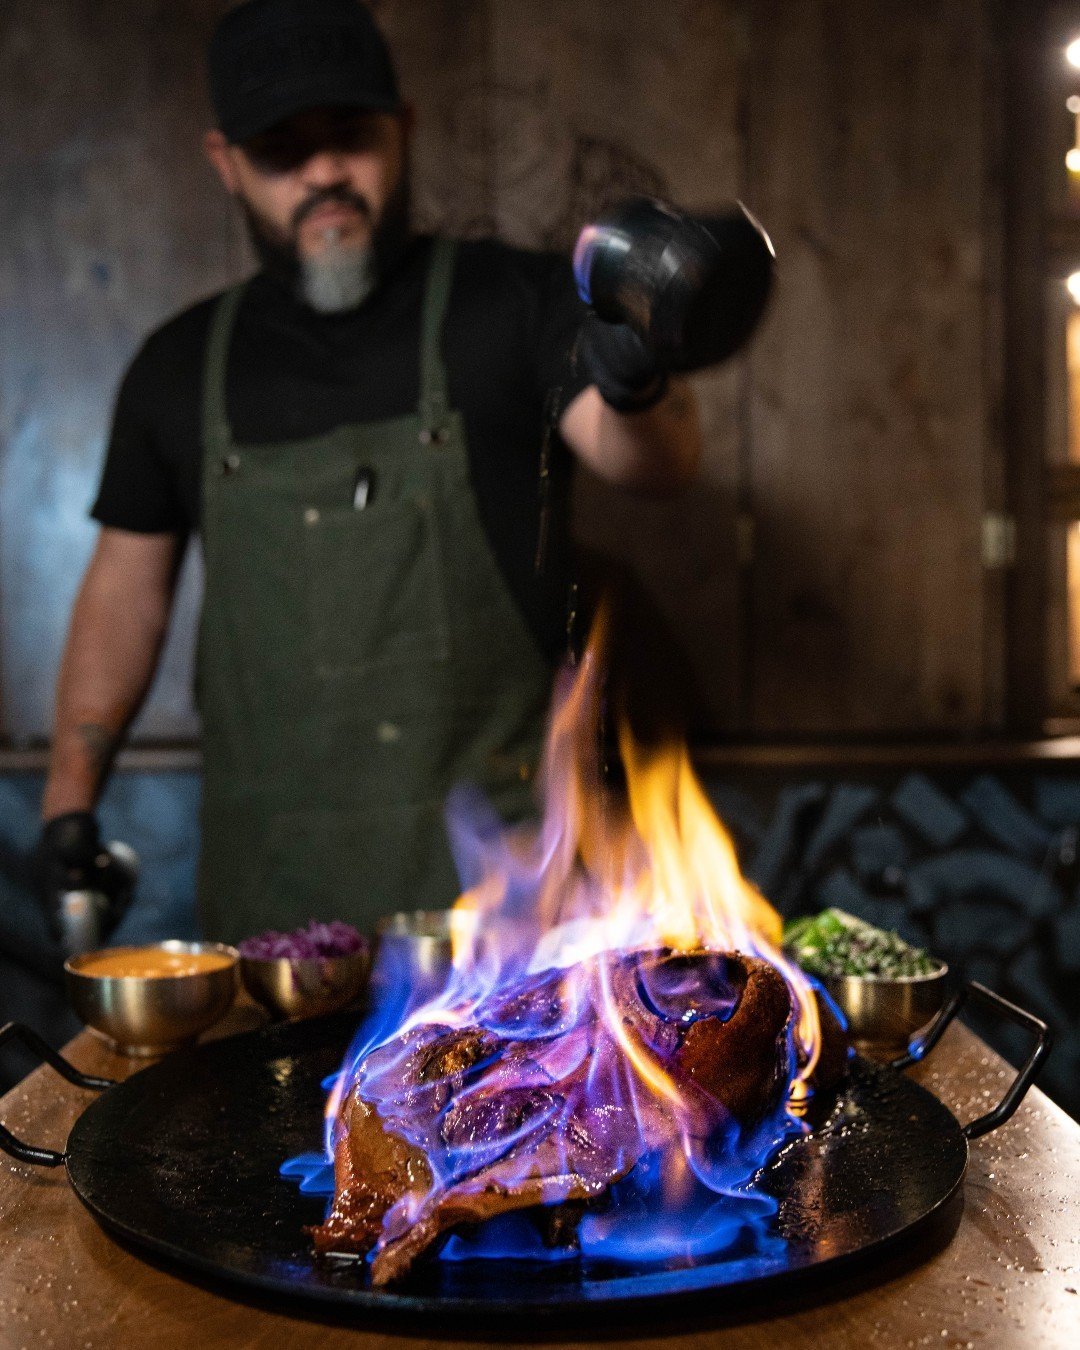 Prepare for an inferno of flavor with our Cabeza en Fuego.🔥 This ghost rider requires 24-hour notice and features braised veal head and Wagyu beef cheek, perfectly complemented by cabbage, onion, cilantro, and corn tortillas.